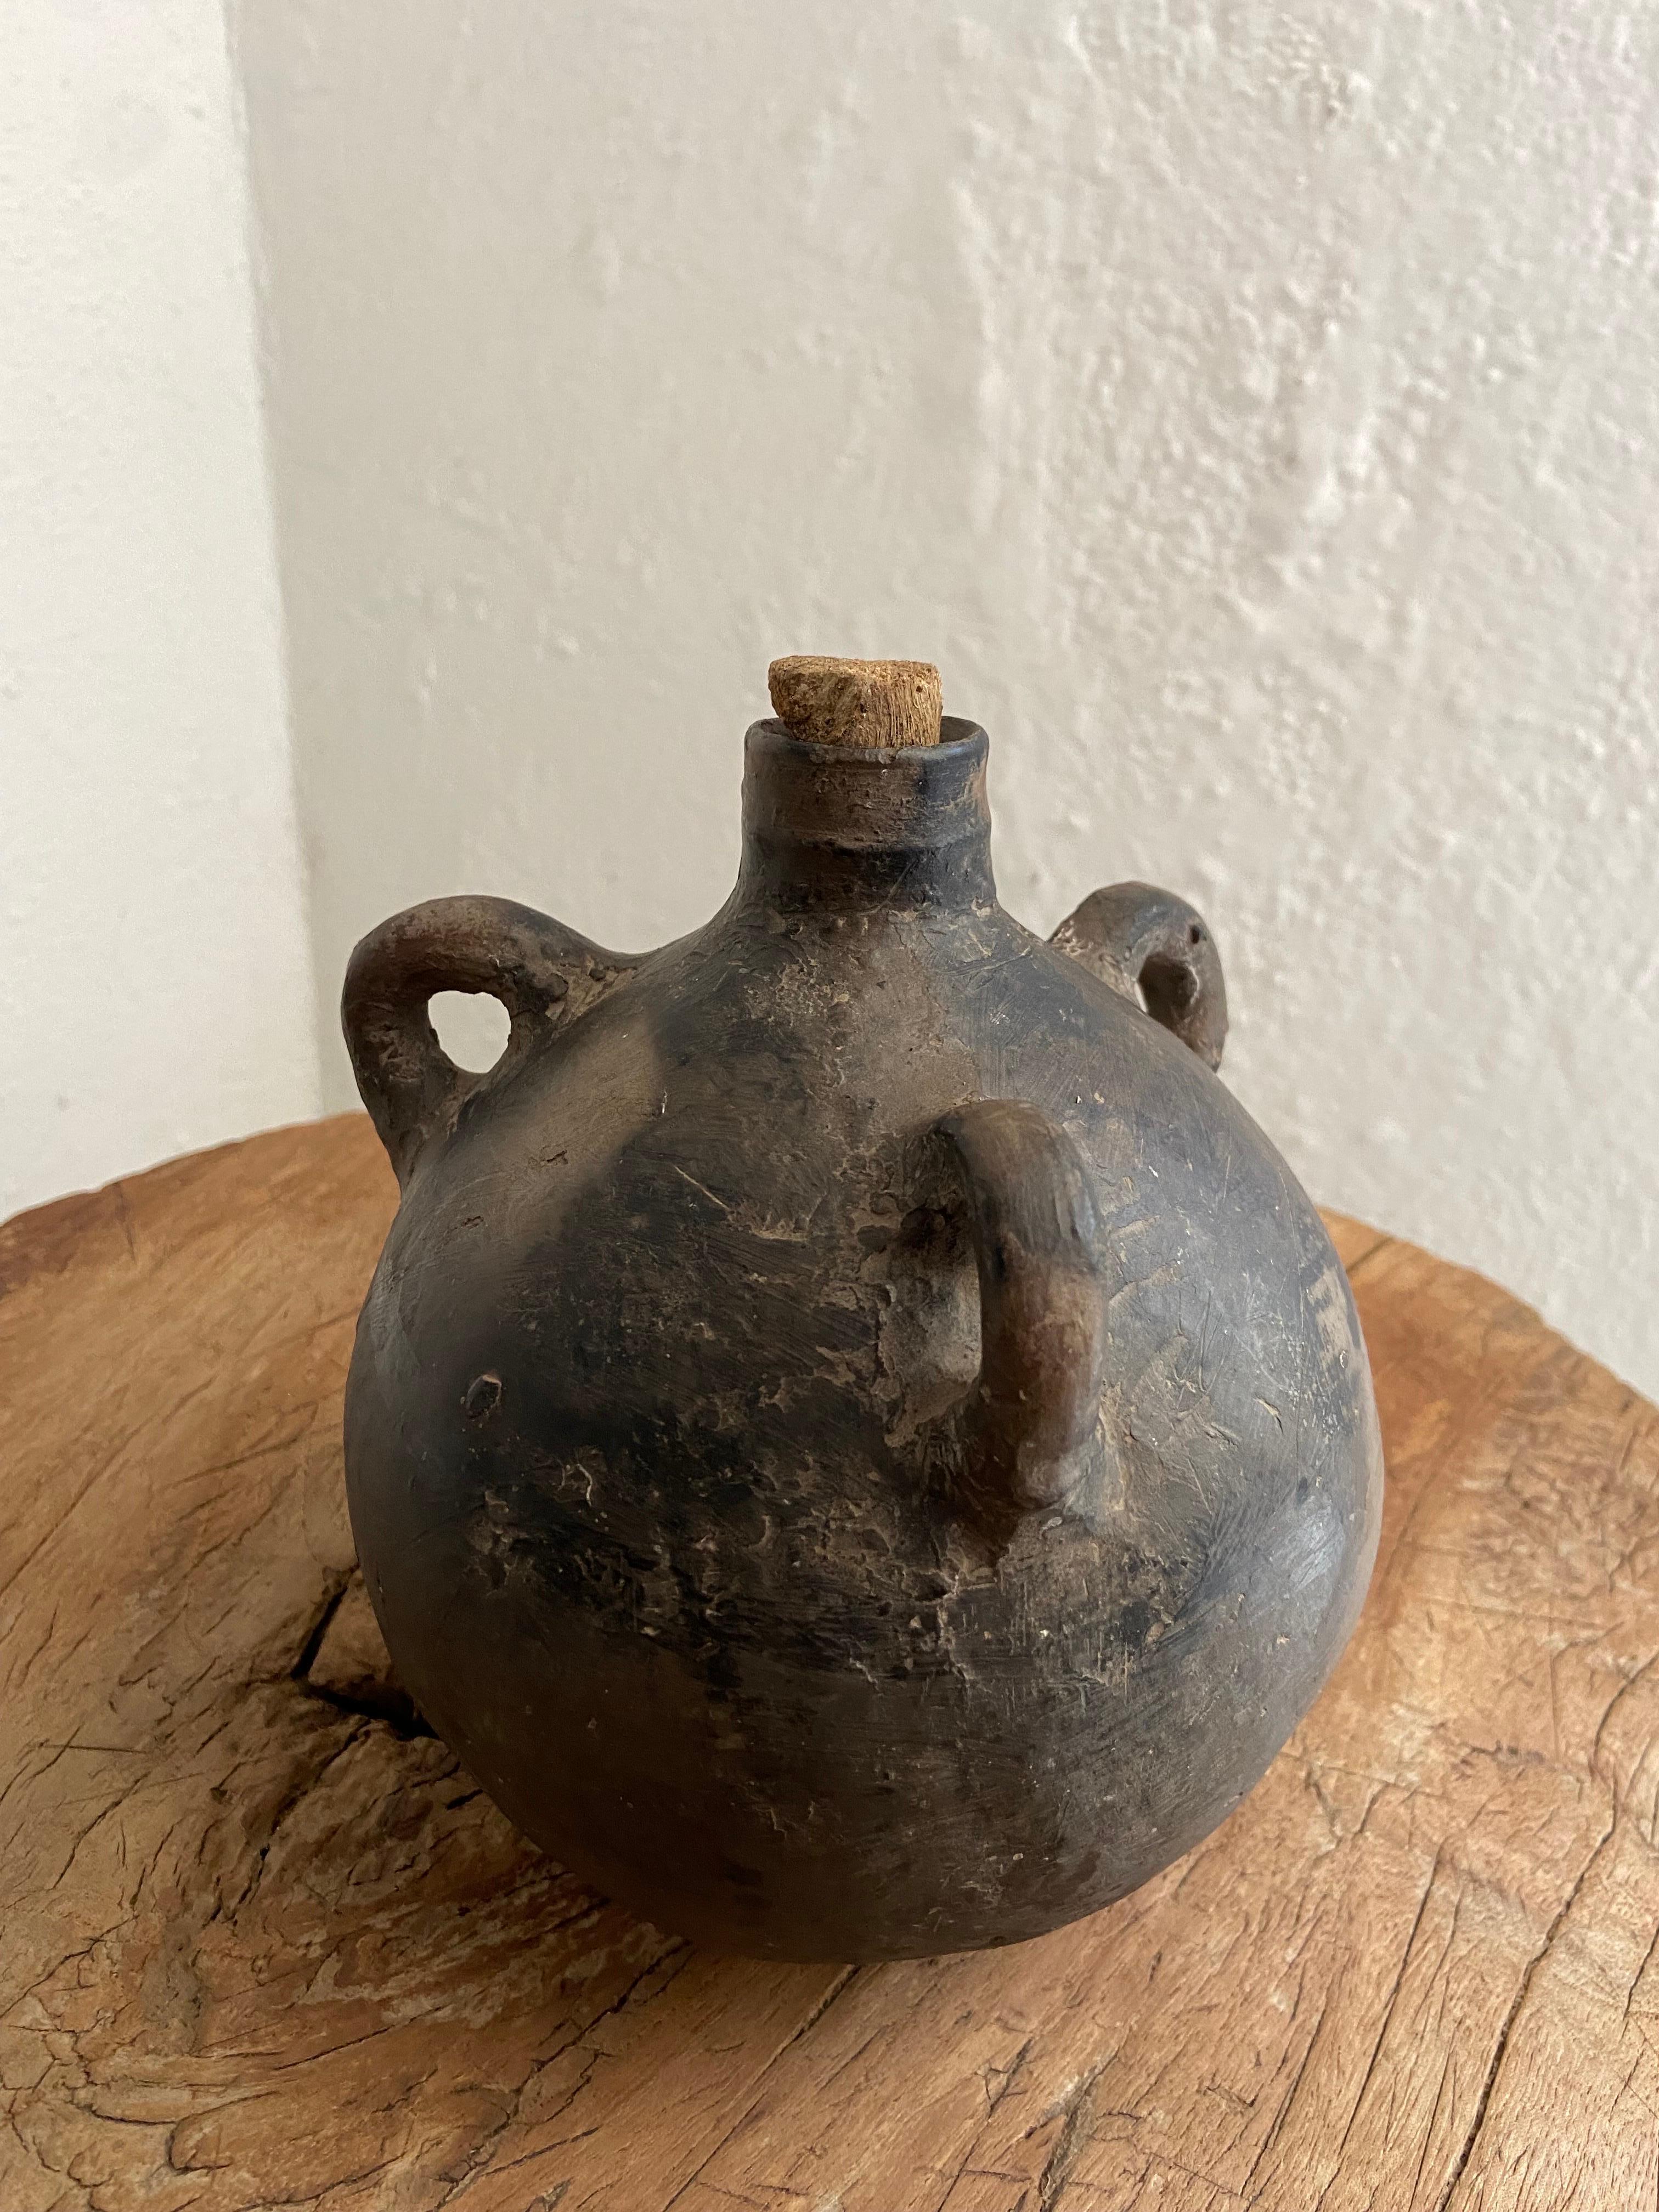 Mid 20th century black clay mezcal jug from Coyotepec, Oaxaca. The three handles are intact and used so the vessel can be carries using a thin gauge agave rope.